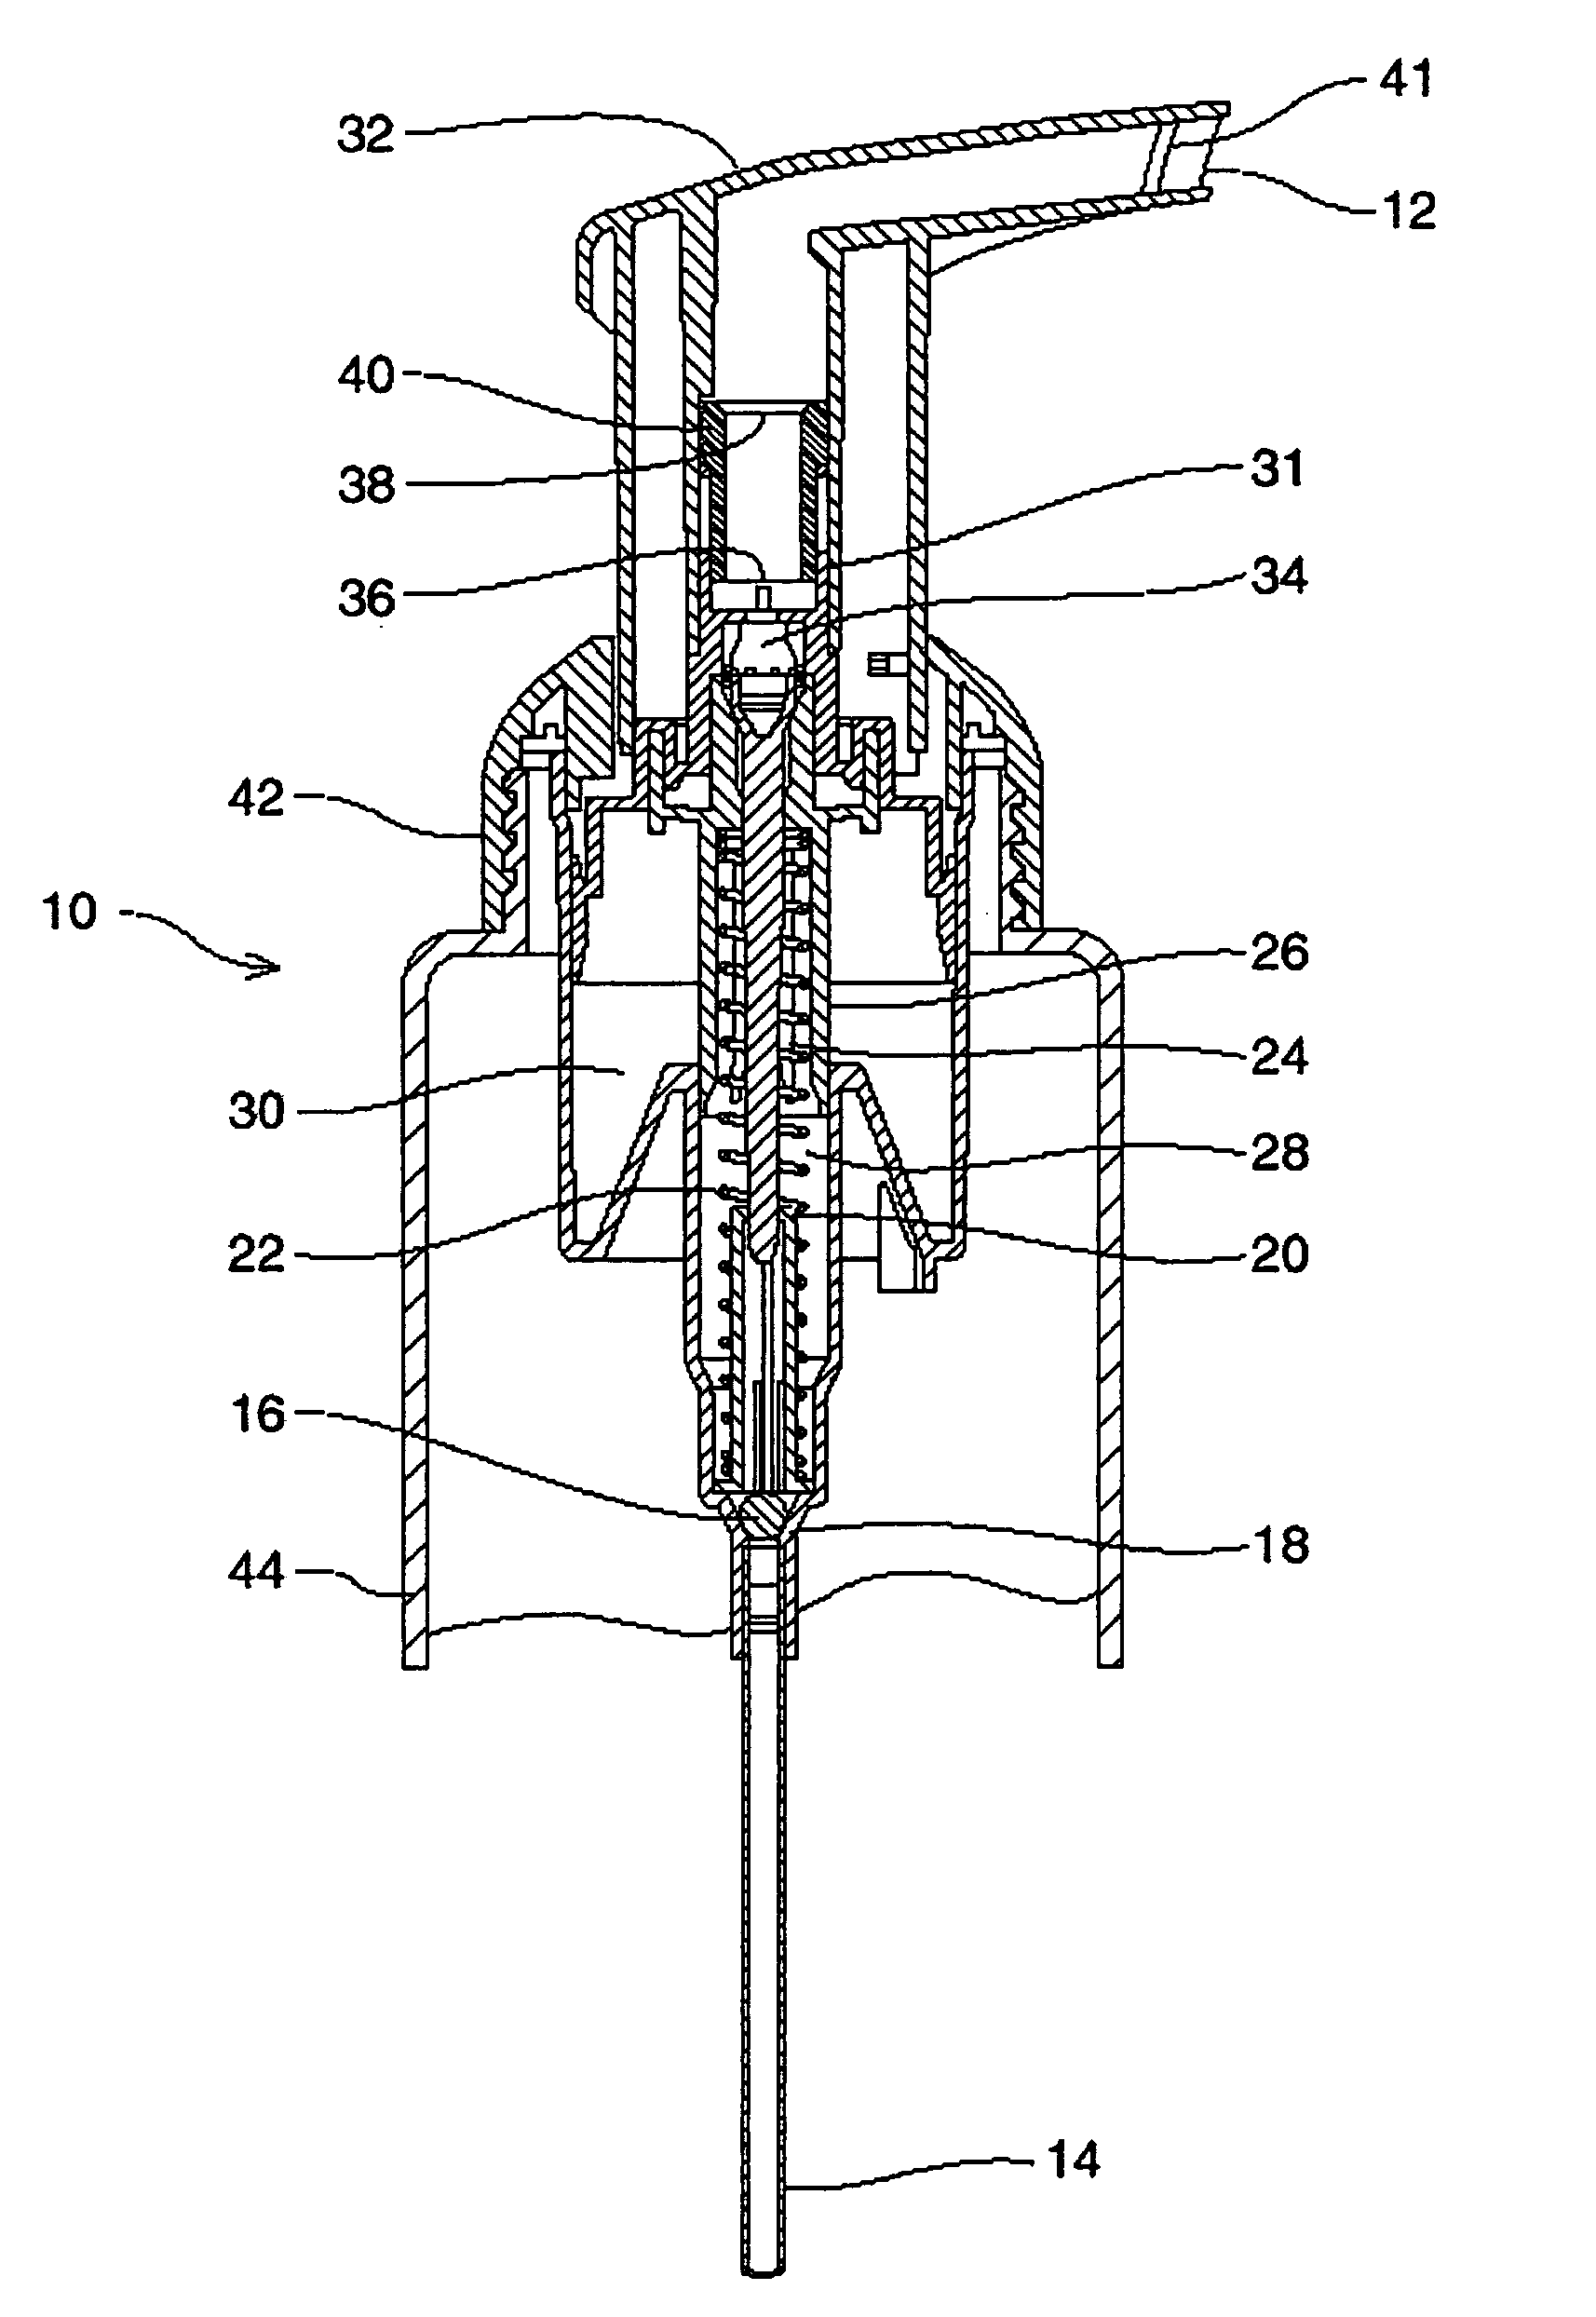 Foam-generating kit containing a foam-generating dispenser and a composition containing a high level of surfactant